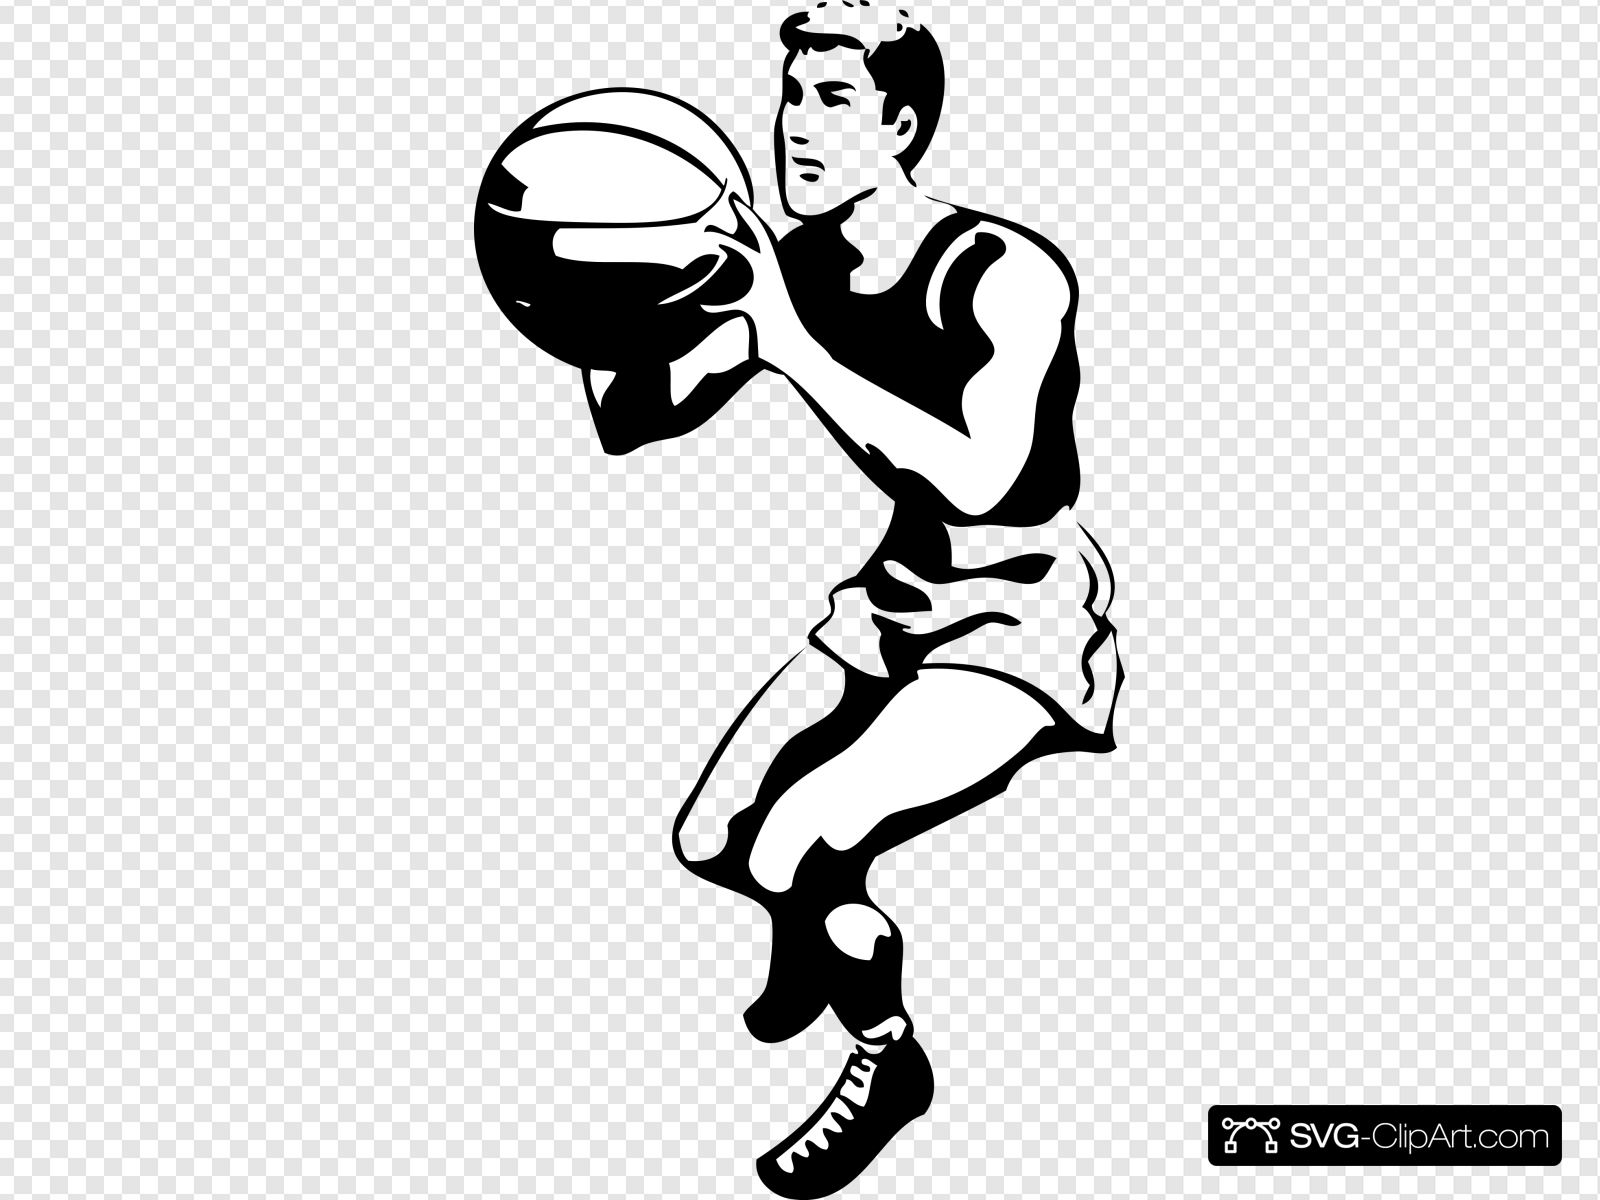 Basketball Player Clip art, Icon and SVG